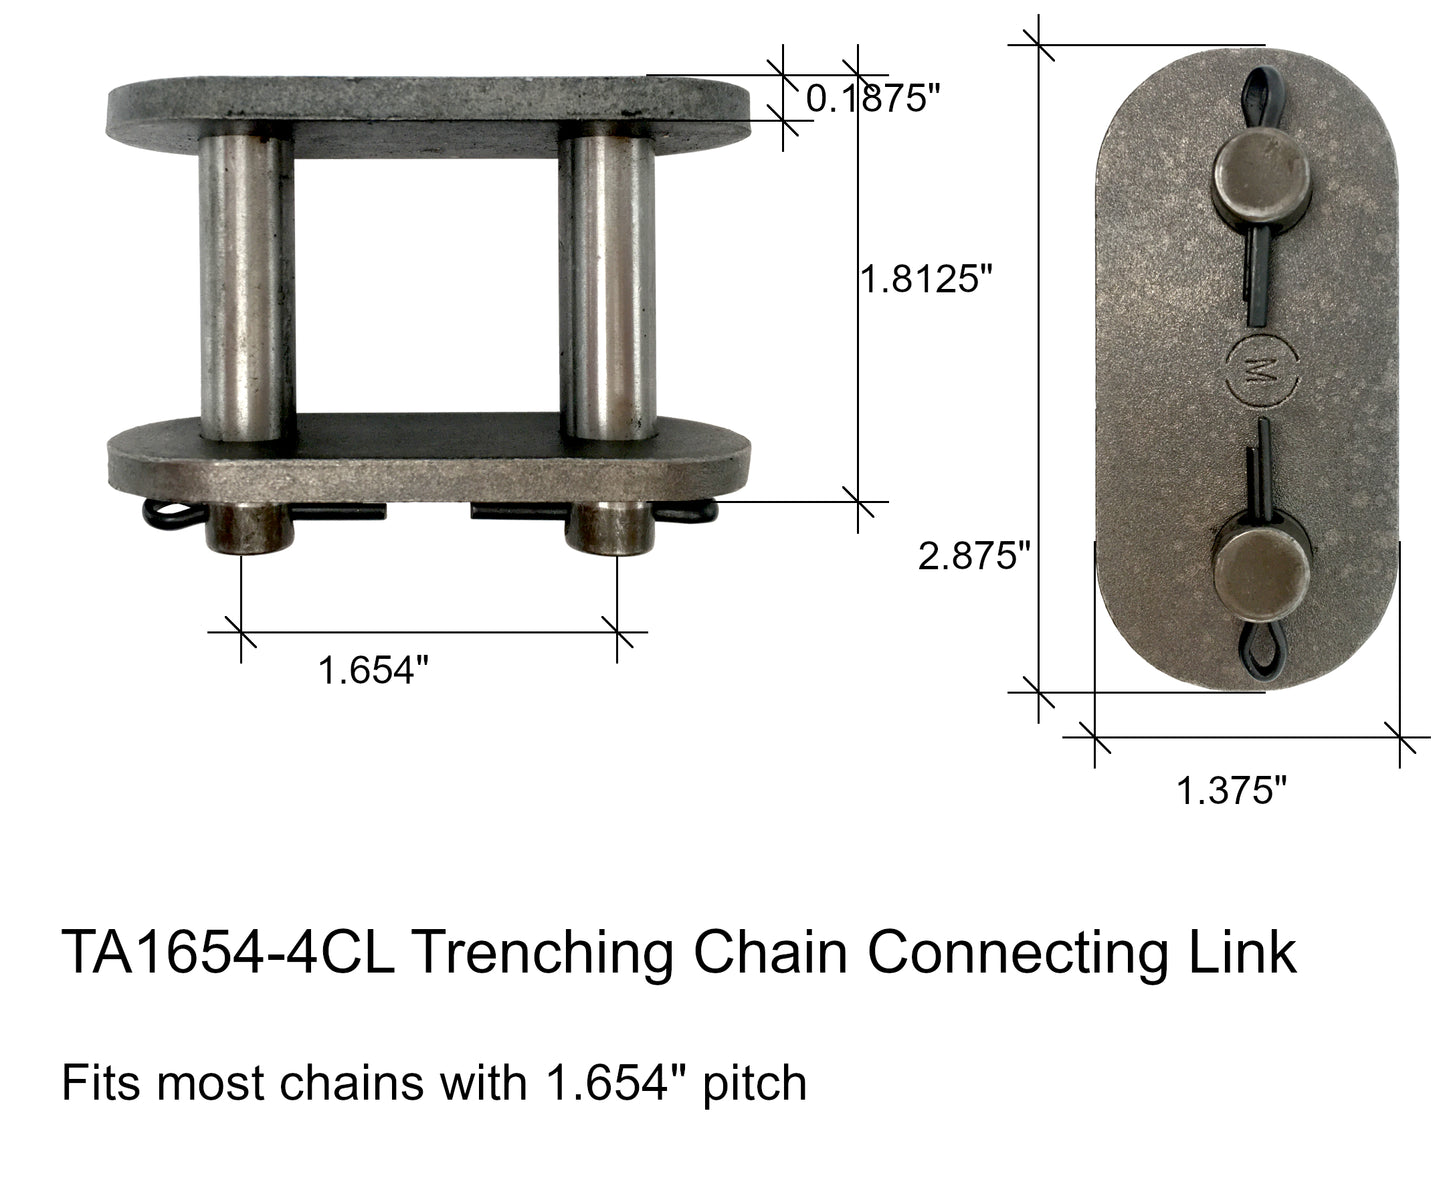 Trenching Chain Connecting Link, Fits most 1.654" pitch - TA1654-4CL, 165CL